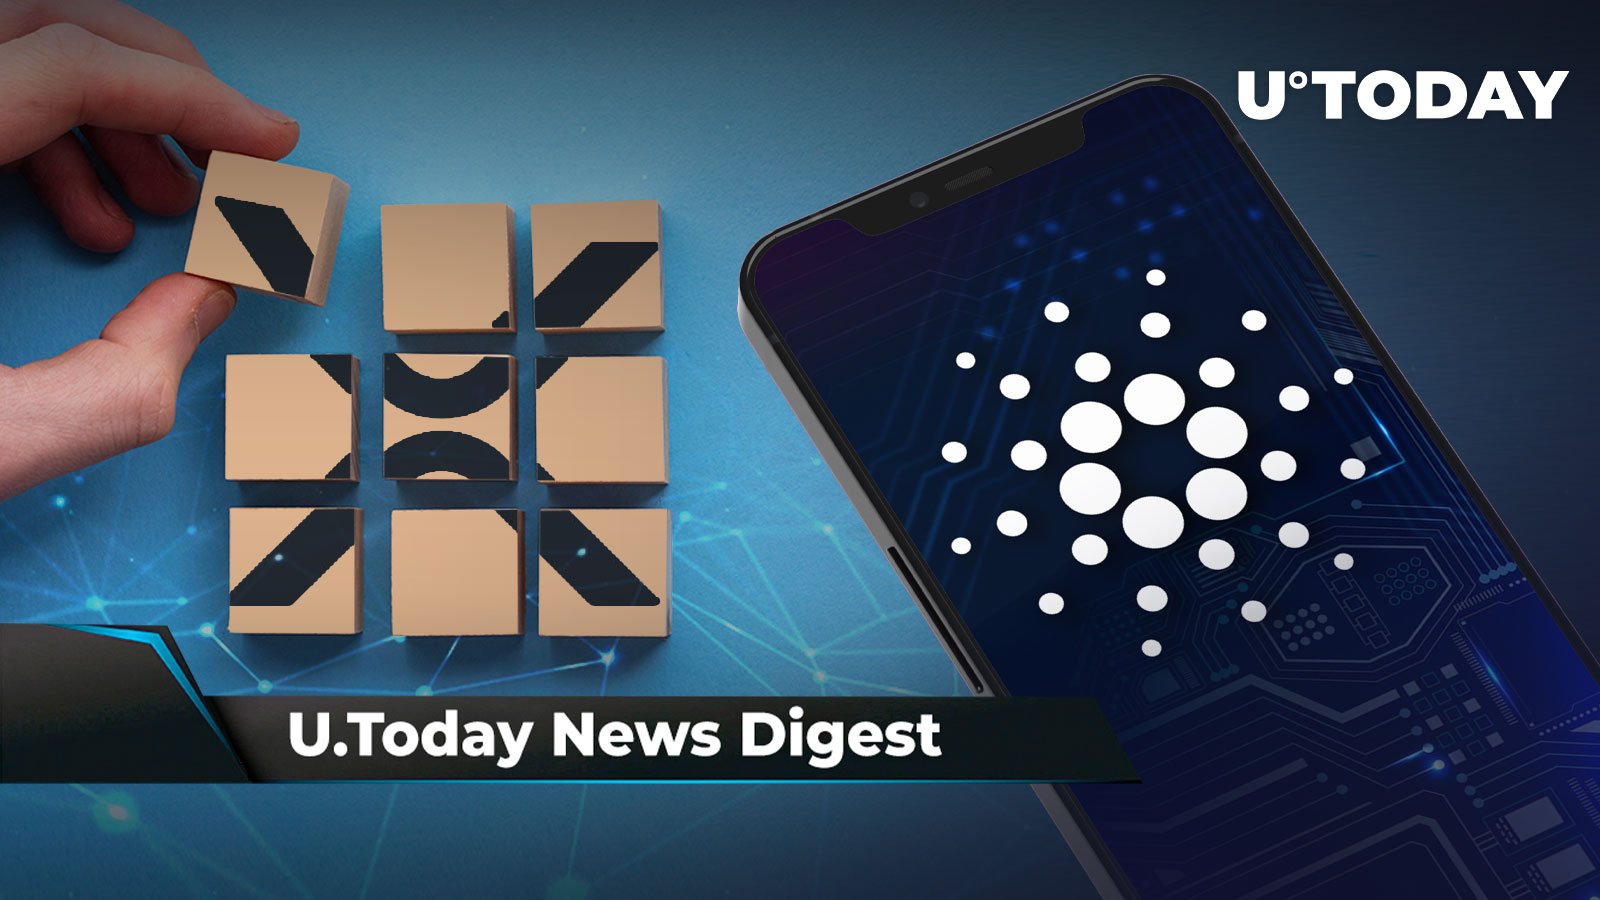 226-billion-shib-moved-hours-before-major-milestone-cardano-s-first-telemedicine-app-goes-live-xrp-s-last-piece-of-puzzle-snapped-into-place-crypto-news-digest-by-u-today